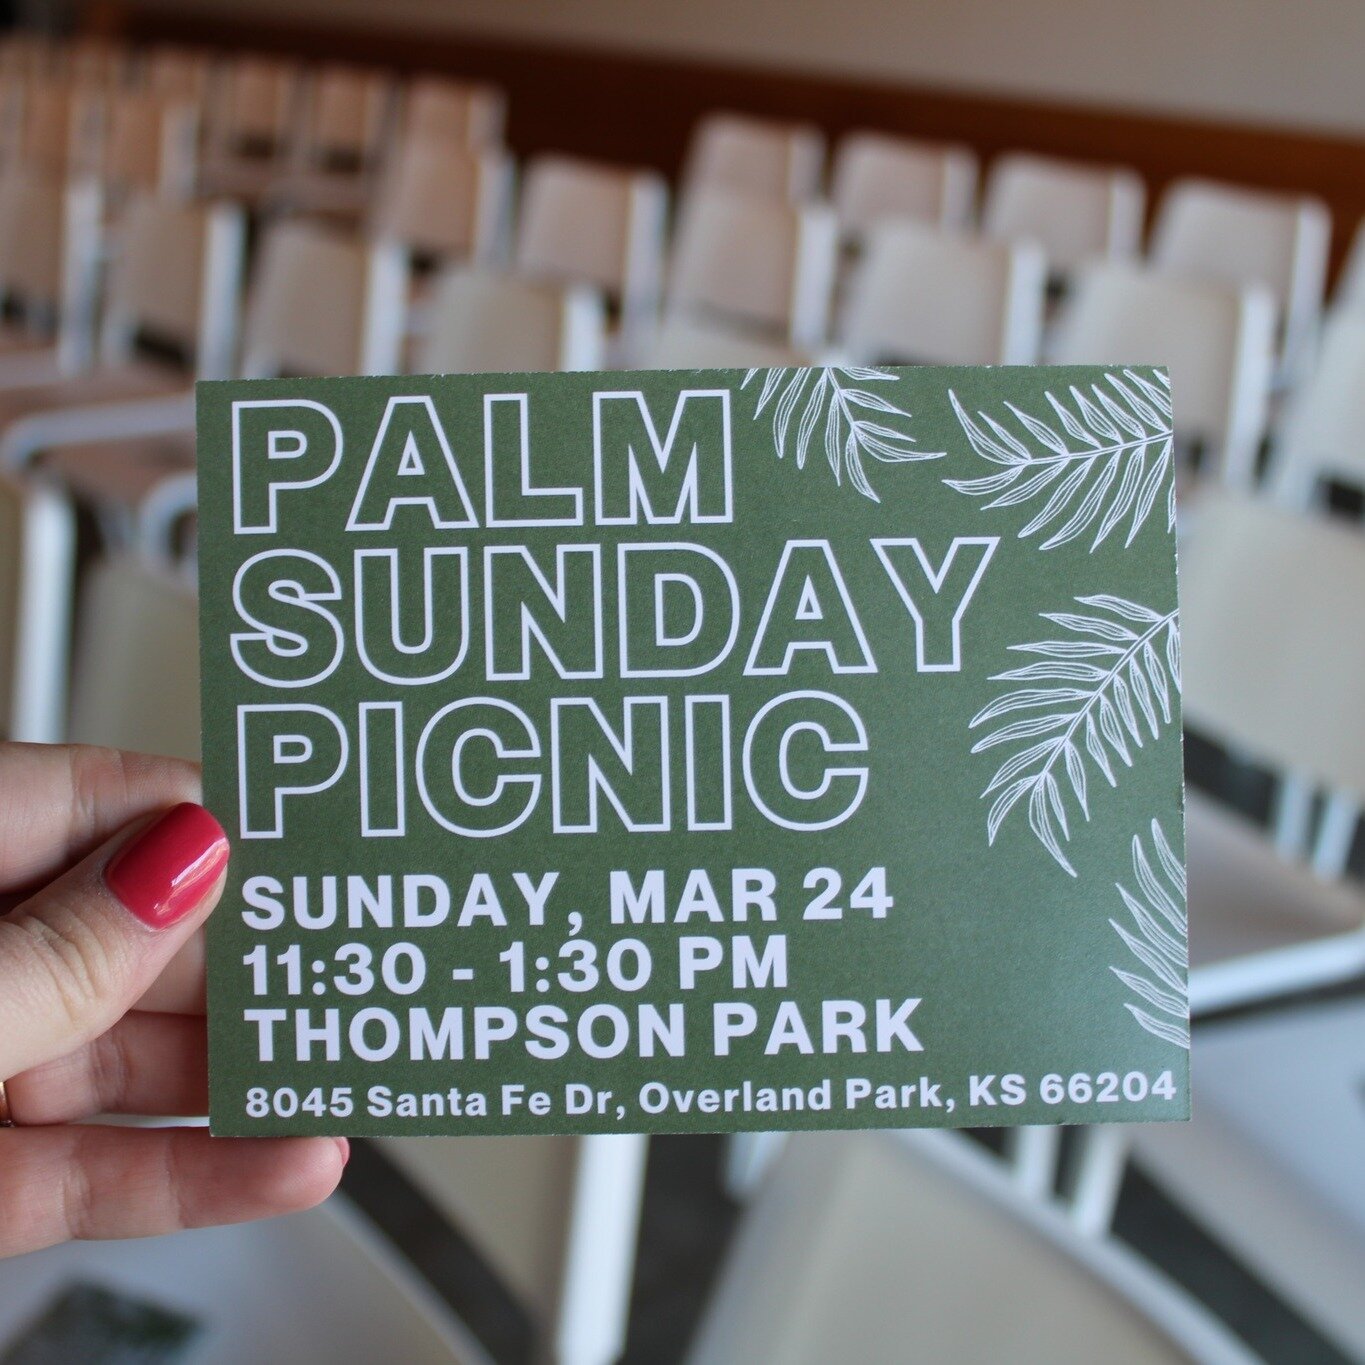 Hey Park City Members! You are invited to our PALM SUNDAY PICNIC 🌿 this coming Sunday, March 24th from 11:30 - 1:30 PM at Thompson Park! 

We will be providing a picnic lunch, but the weather may determine if we eat our meal indoors or outdoors 🌥☔️